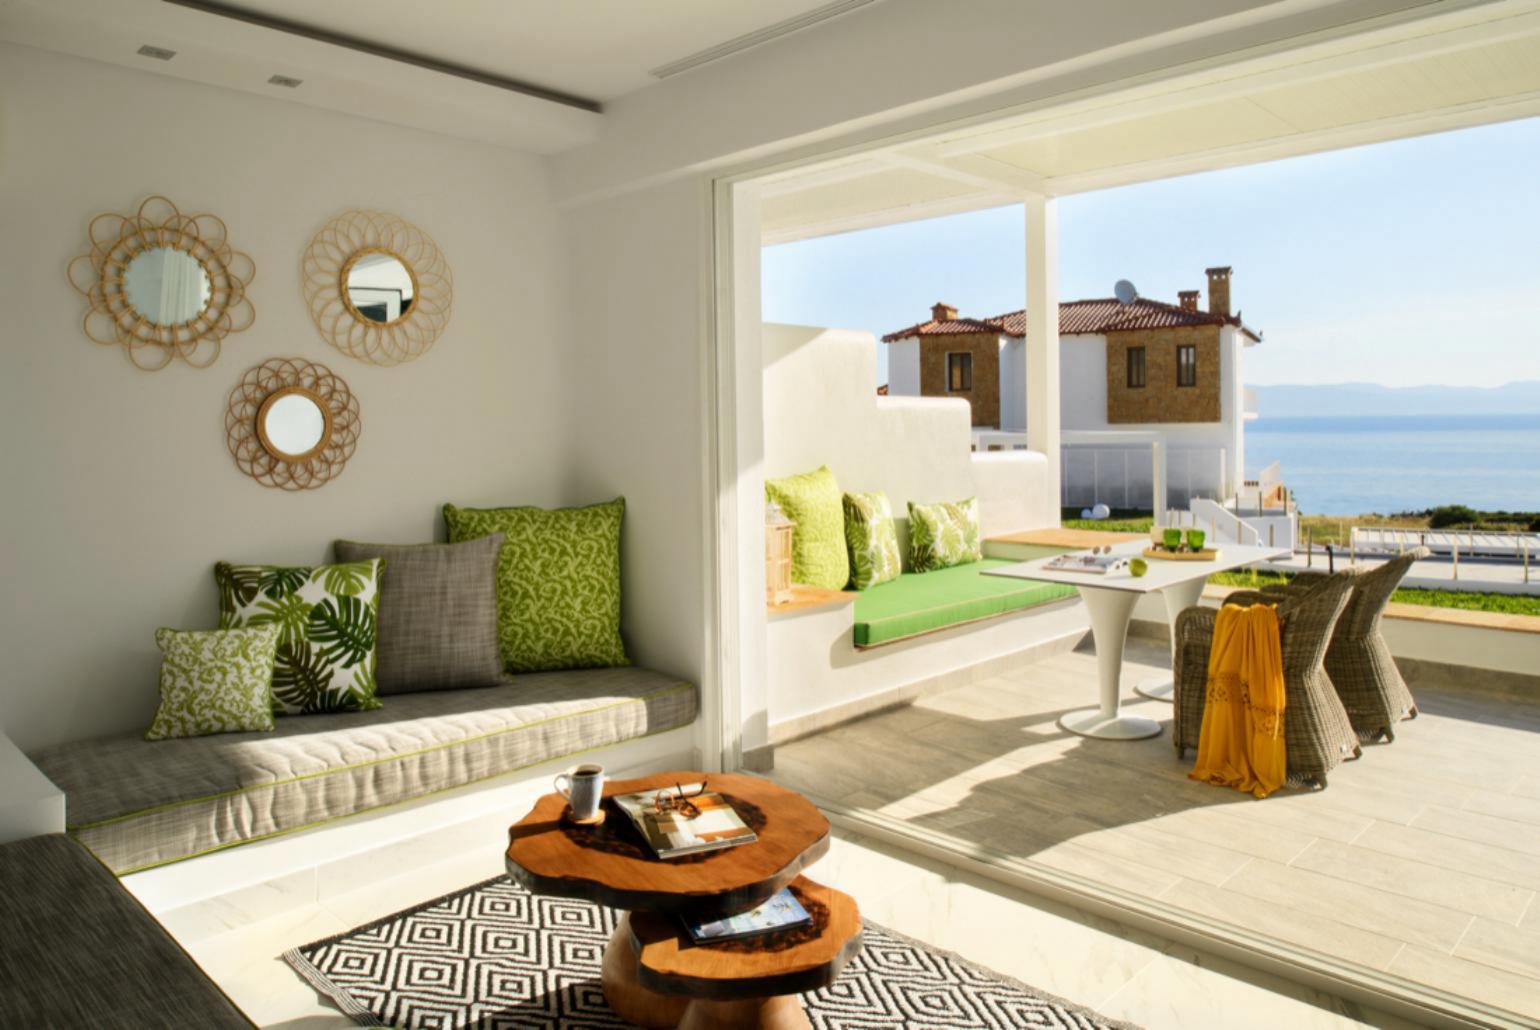 Living room with sofas, dining area, A/C, WiFi internet, satellite TV, and terrace access with sea views